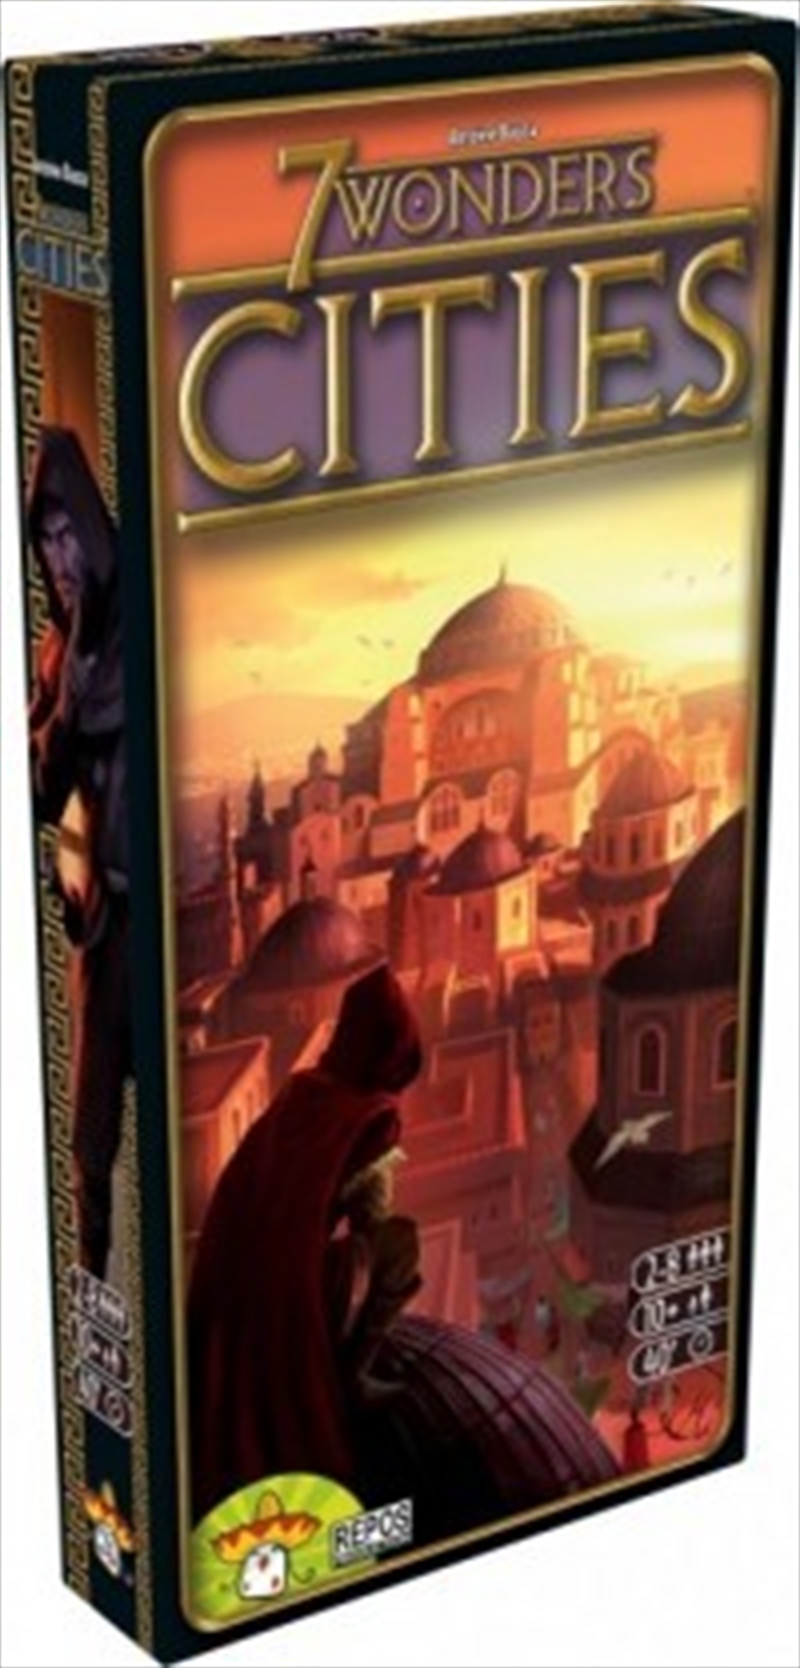 7 Wonders Cities Expansion/Product Detail/Board Games